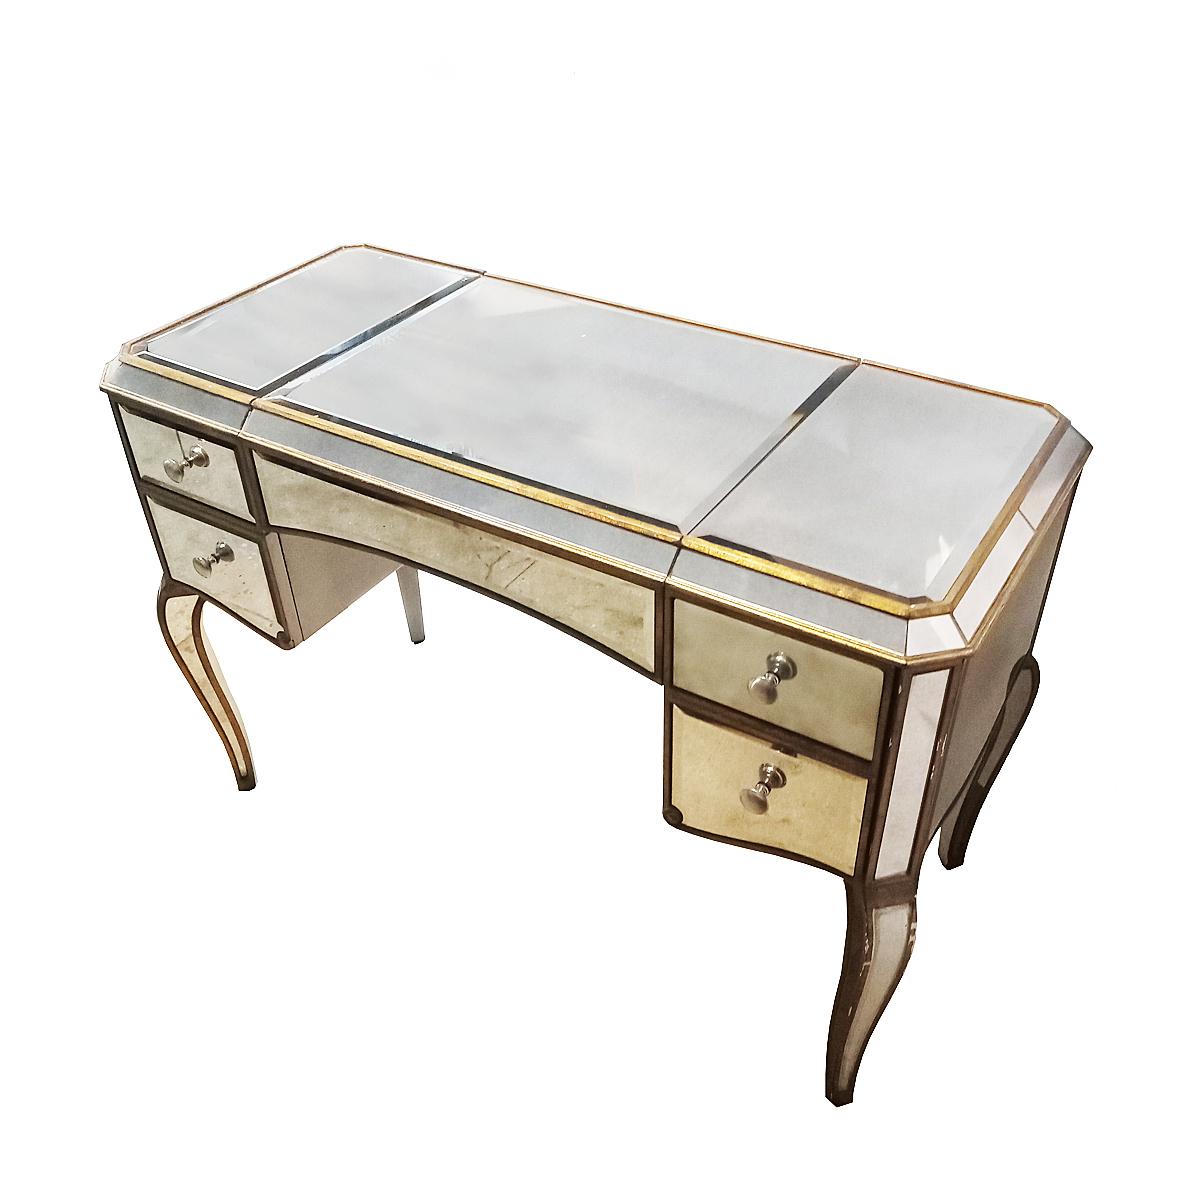 A mirrored dressing table, Mid-Century modern, circa 1960. Giltwood accents, turned legs and 3 drawers, one on the right and two small ones on the left. The top surface opens to reveal 3  storage compartments and an additional mirror. 

Good, stable